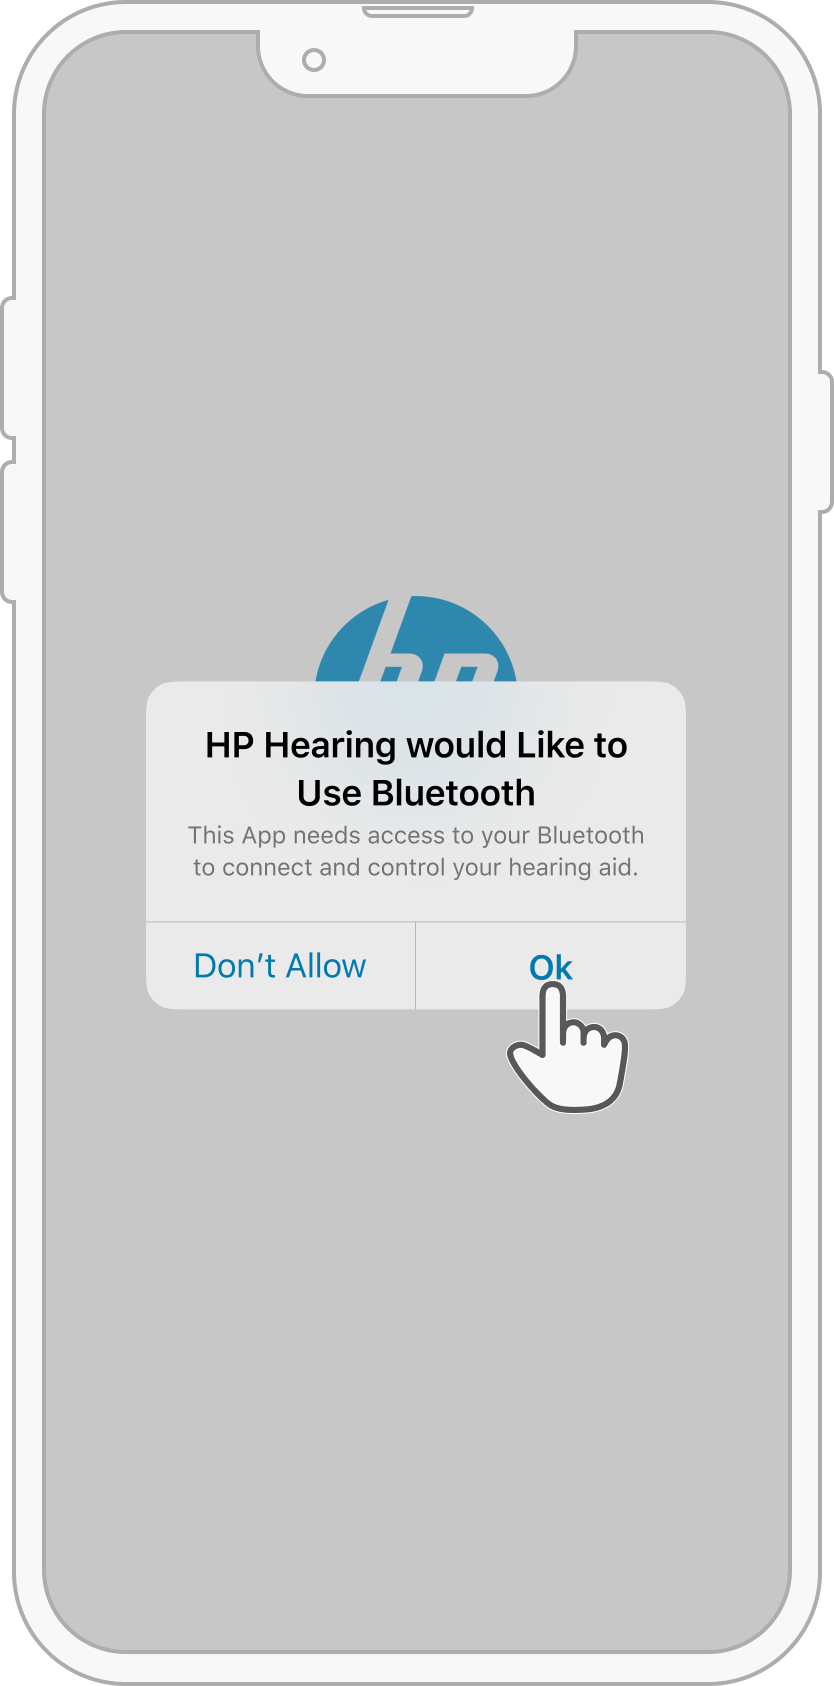 USR-SUP-002-25_-_HP_Hearing_PRO_Support_Asset_____Pairing_and_connecting_my_hearing_aids_-v1.0.png